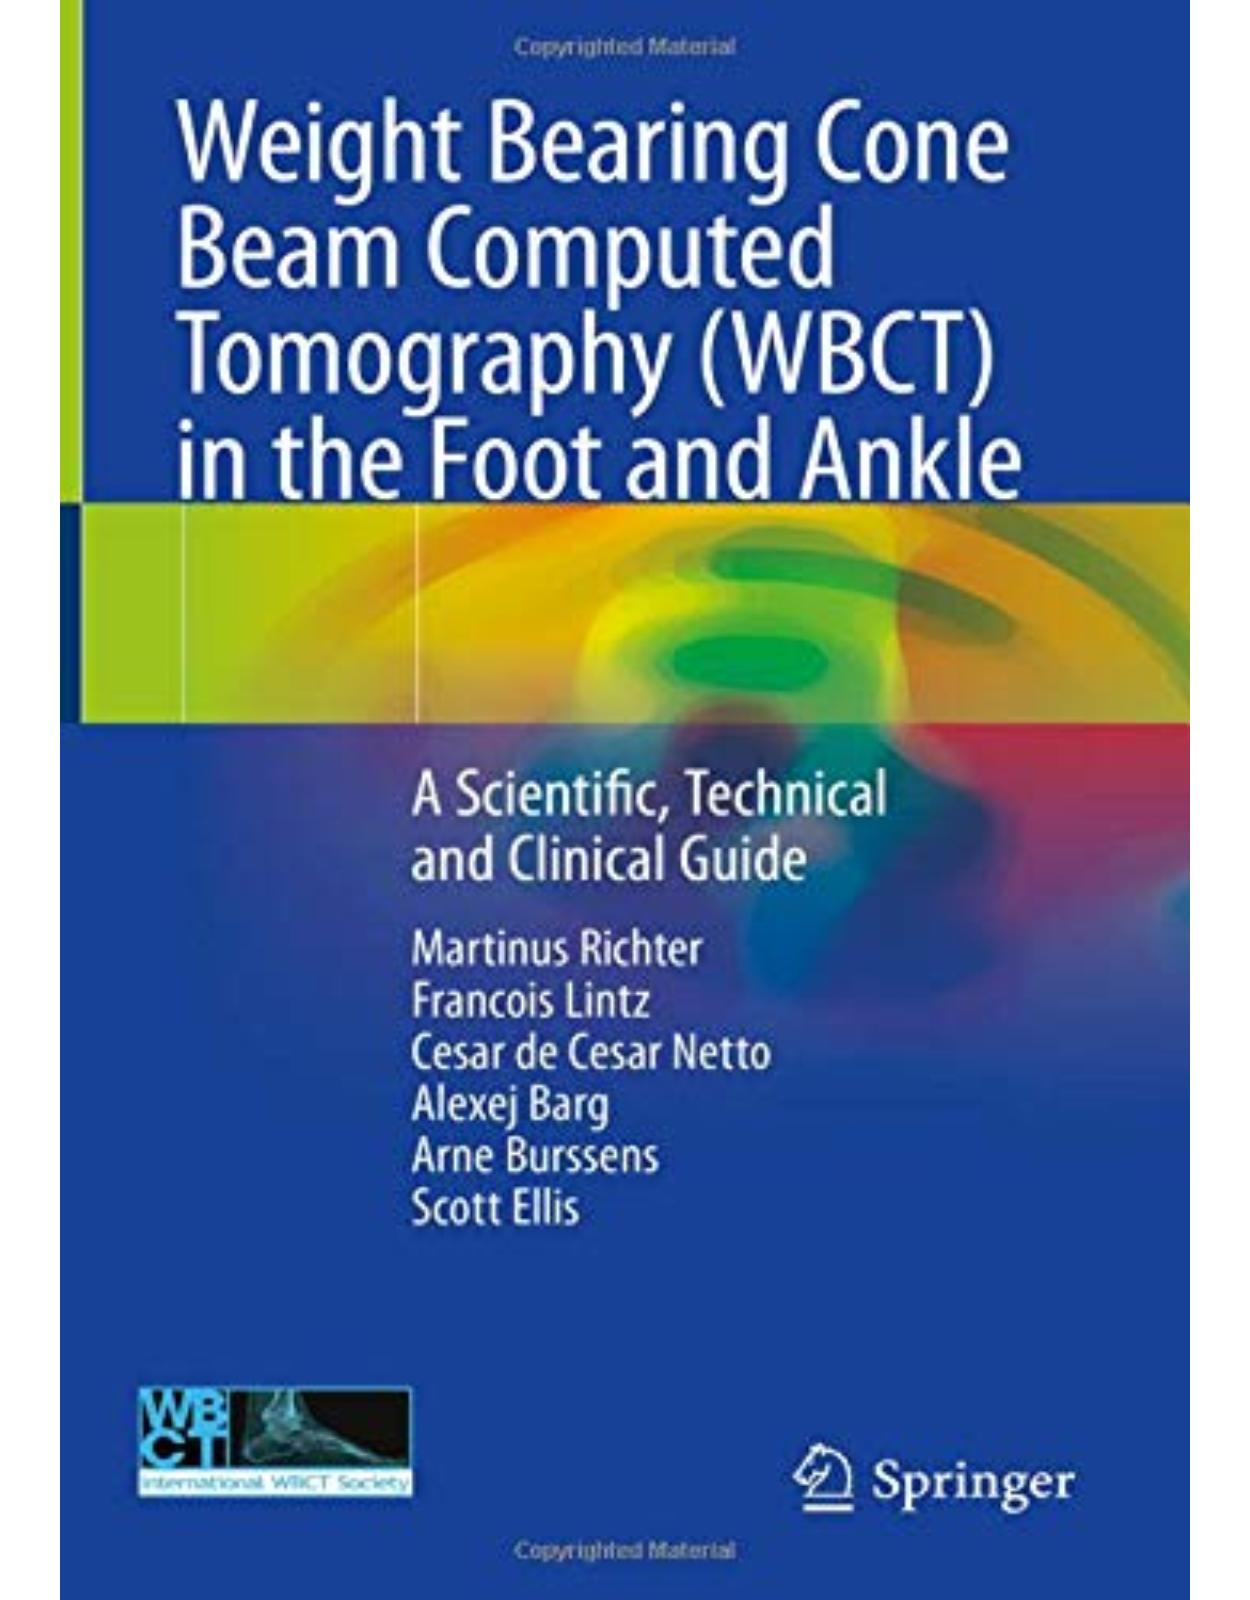 Weight Bearing Cone Beam Computed Tomography (WBCT) in the Foot and Ankle: A Scientific, Technical and Clinical Guide